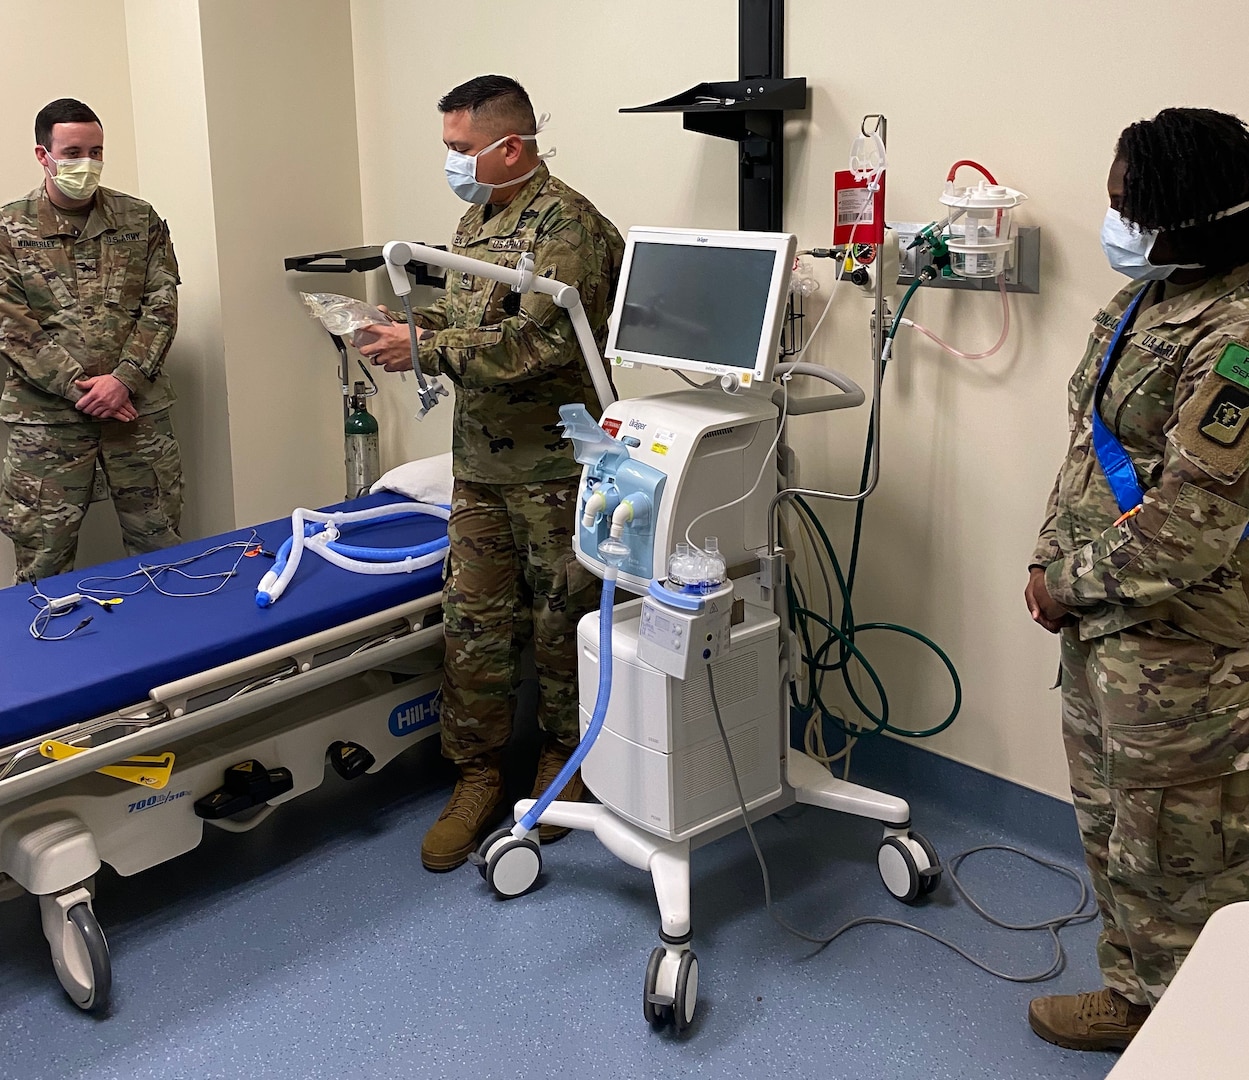 Students and instructors in the Medical Education and Training Respiratory Therapist program practice safe distancing and wear face coverings while training with mechanical ventilators.